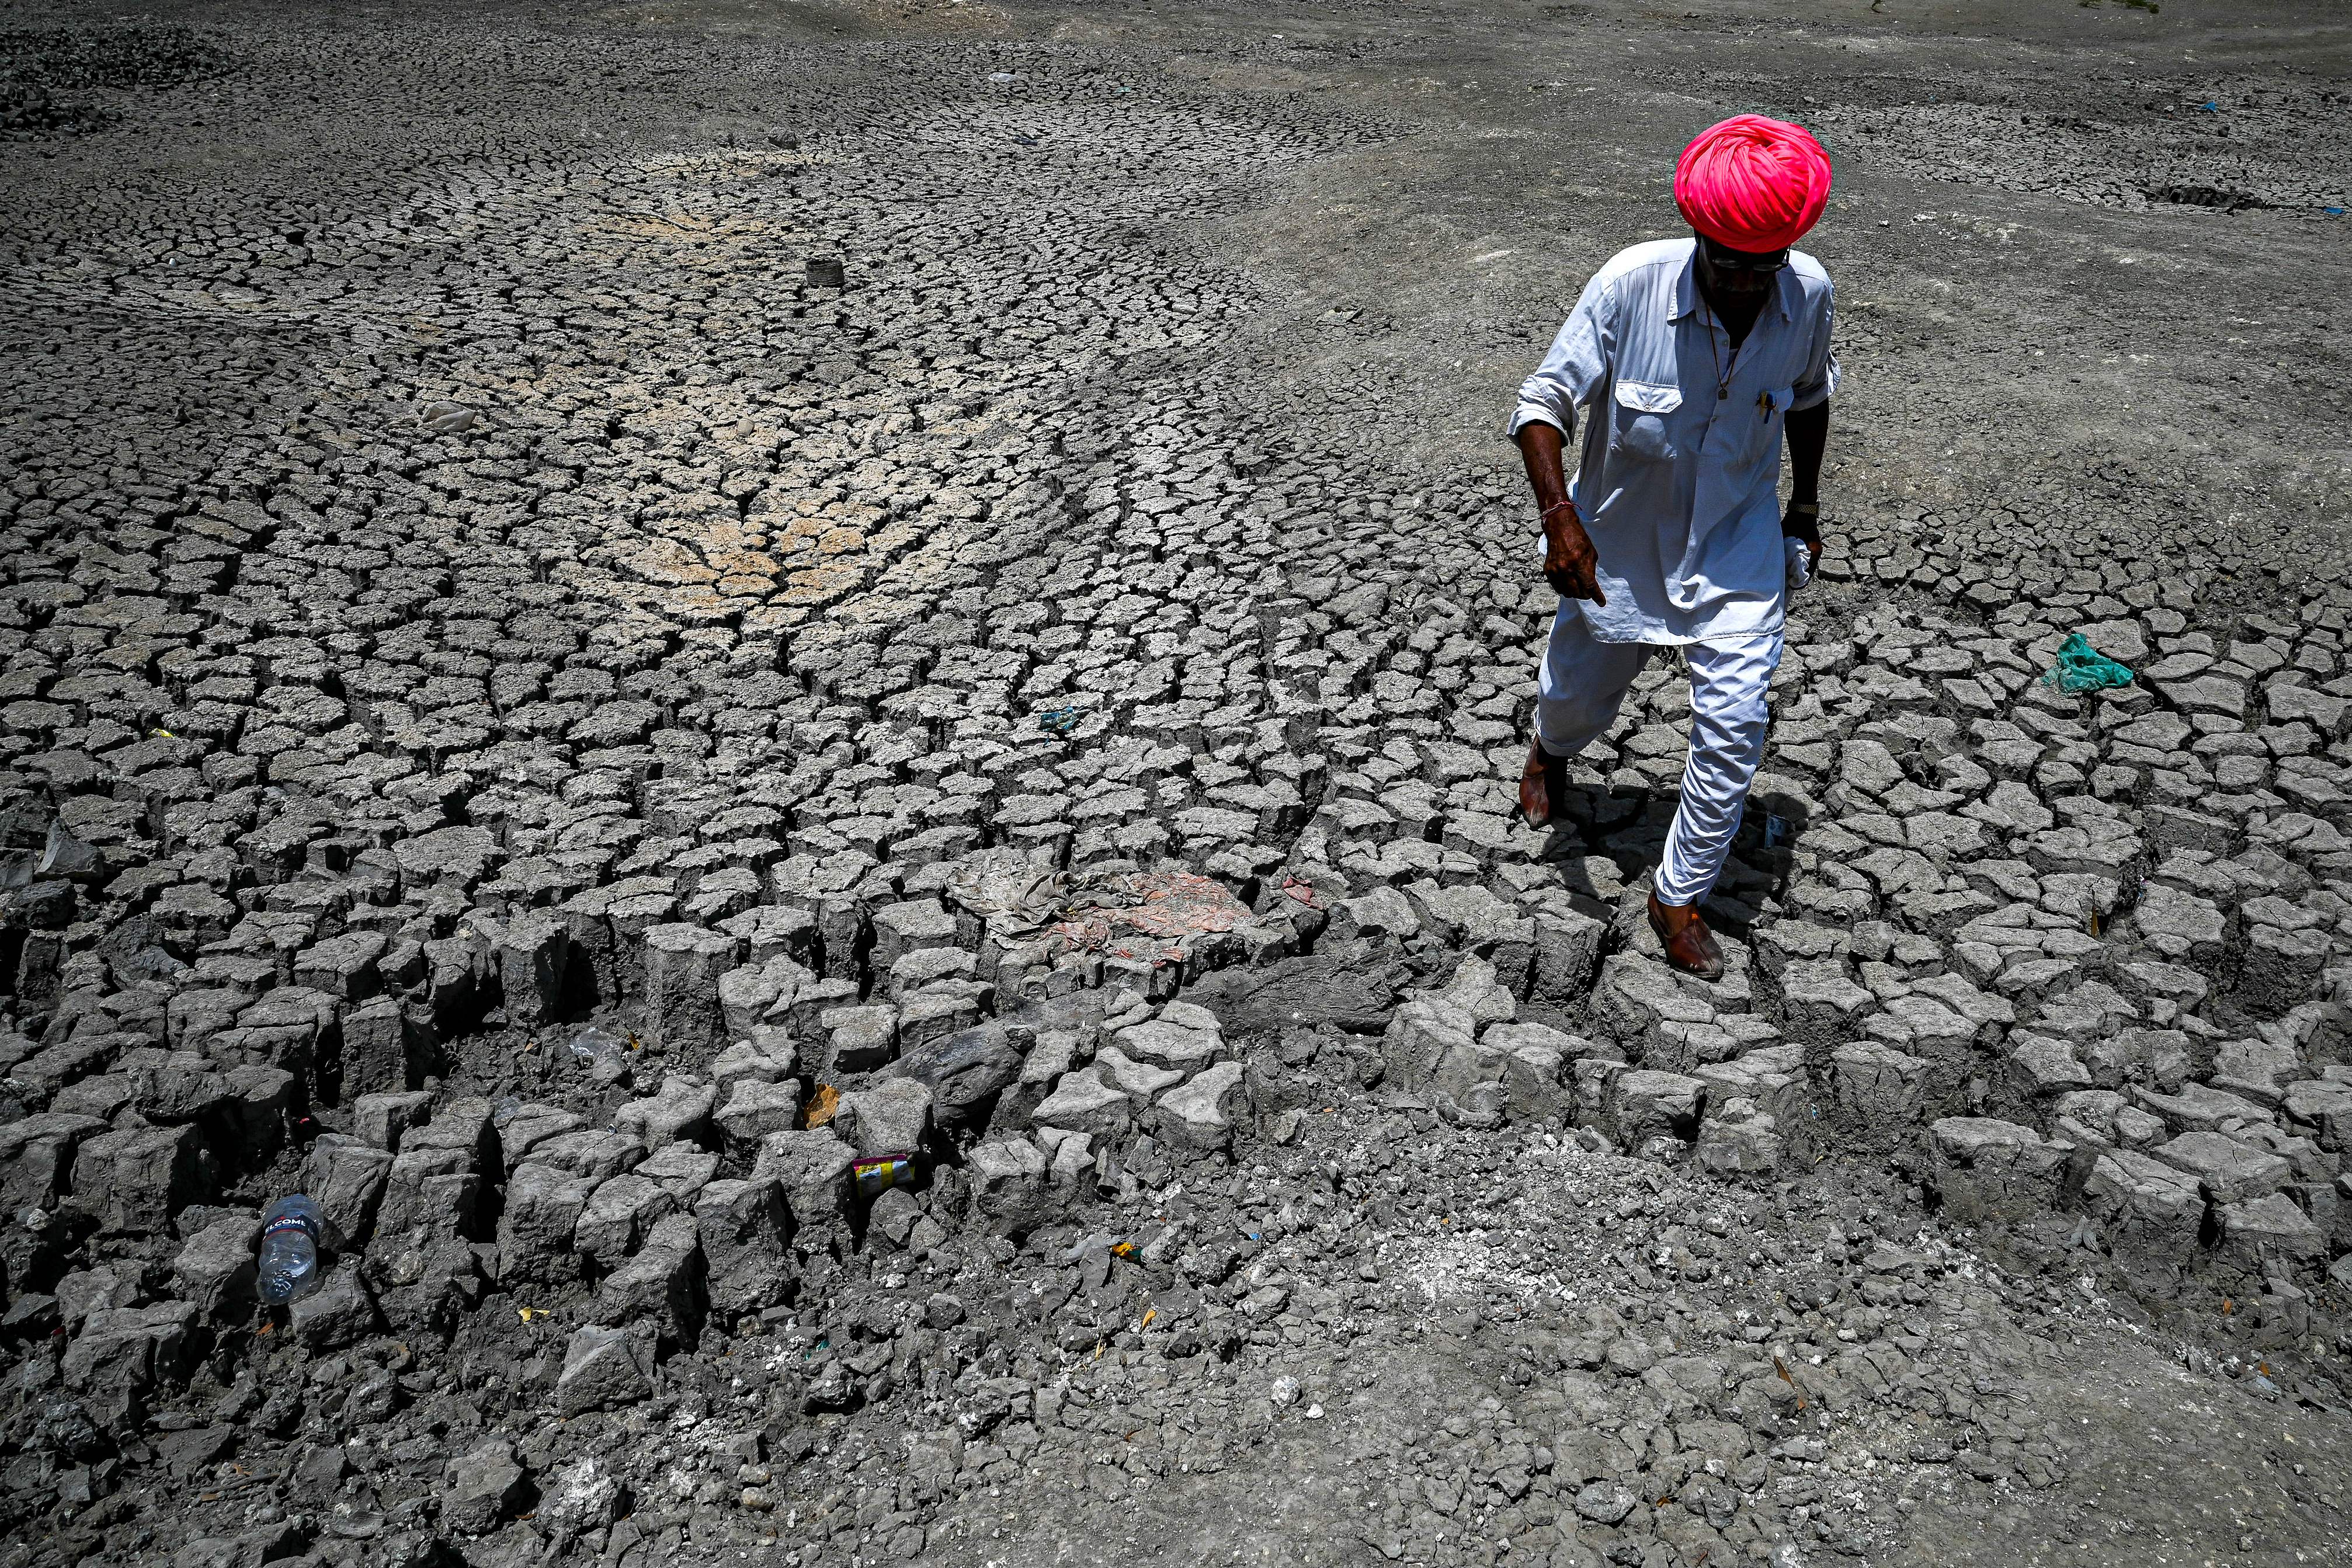 India’s heatwave was followed by a drought in several regions that further impacted agricultural production